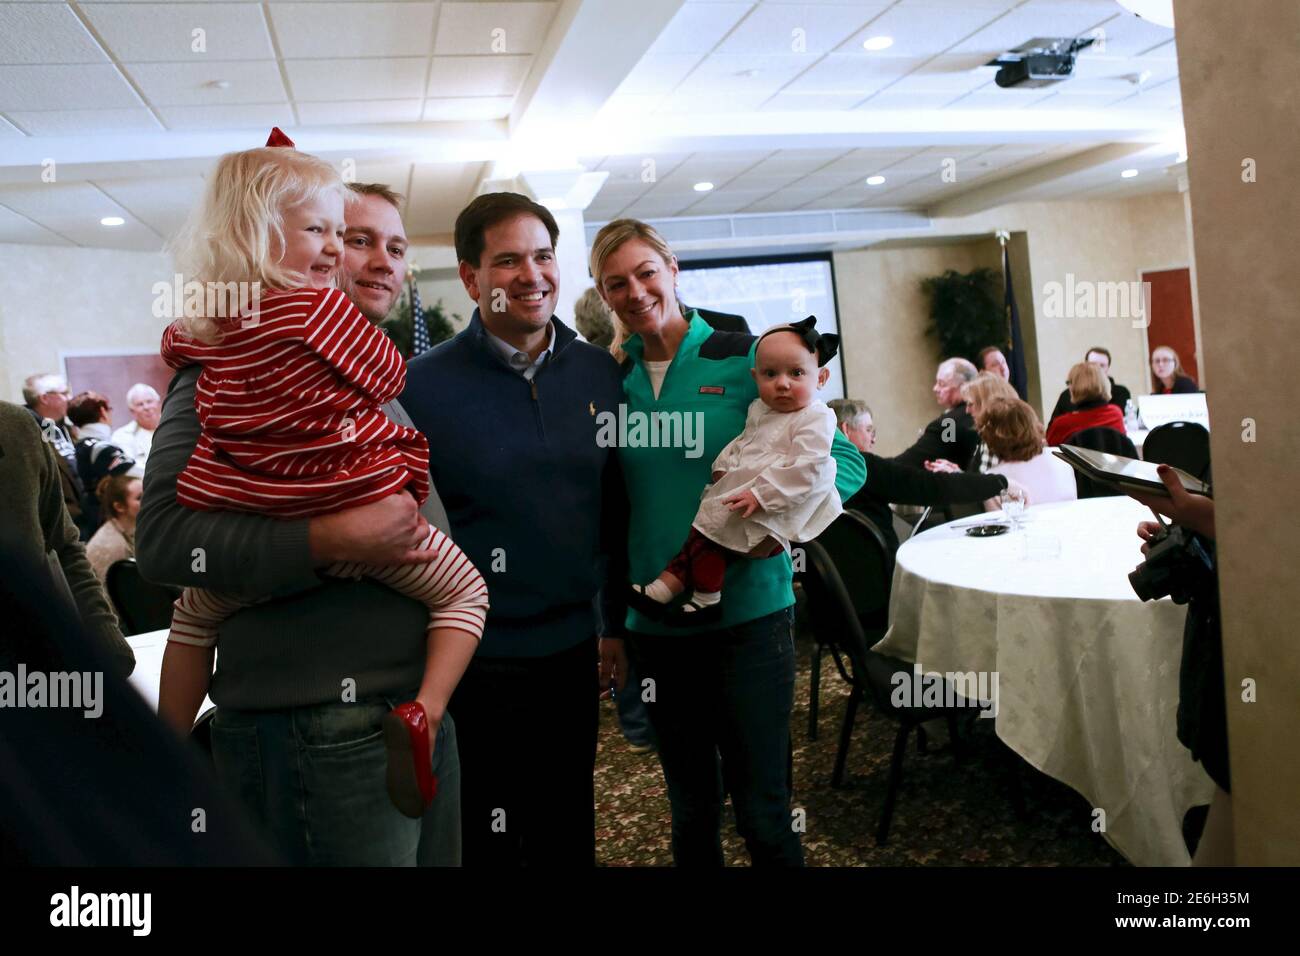 U.S. Republican presidential candidate and U.S. Senator Marco Rubio stands for a photo with Charlotte Meehan (3 yrs old) Jonathan Meehan, Heather Meehan who holds her daughter Katie Meehan 8 months old at a Miami Dolphins versus New England Patriots watch party in Atkinson, New Hampshire, January 3, 2016.  REUTERS/Katherine Taylor Stock Photo